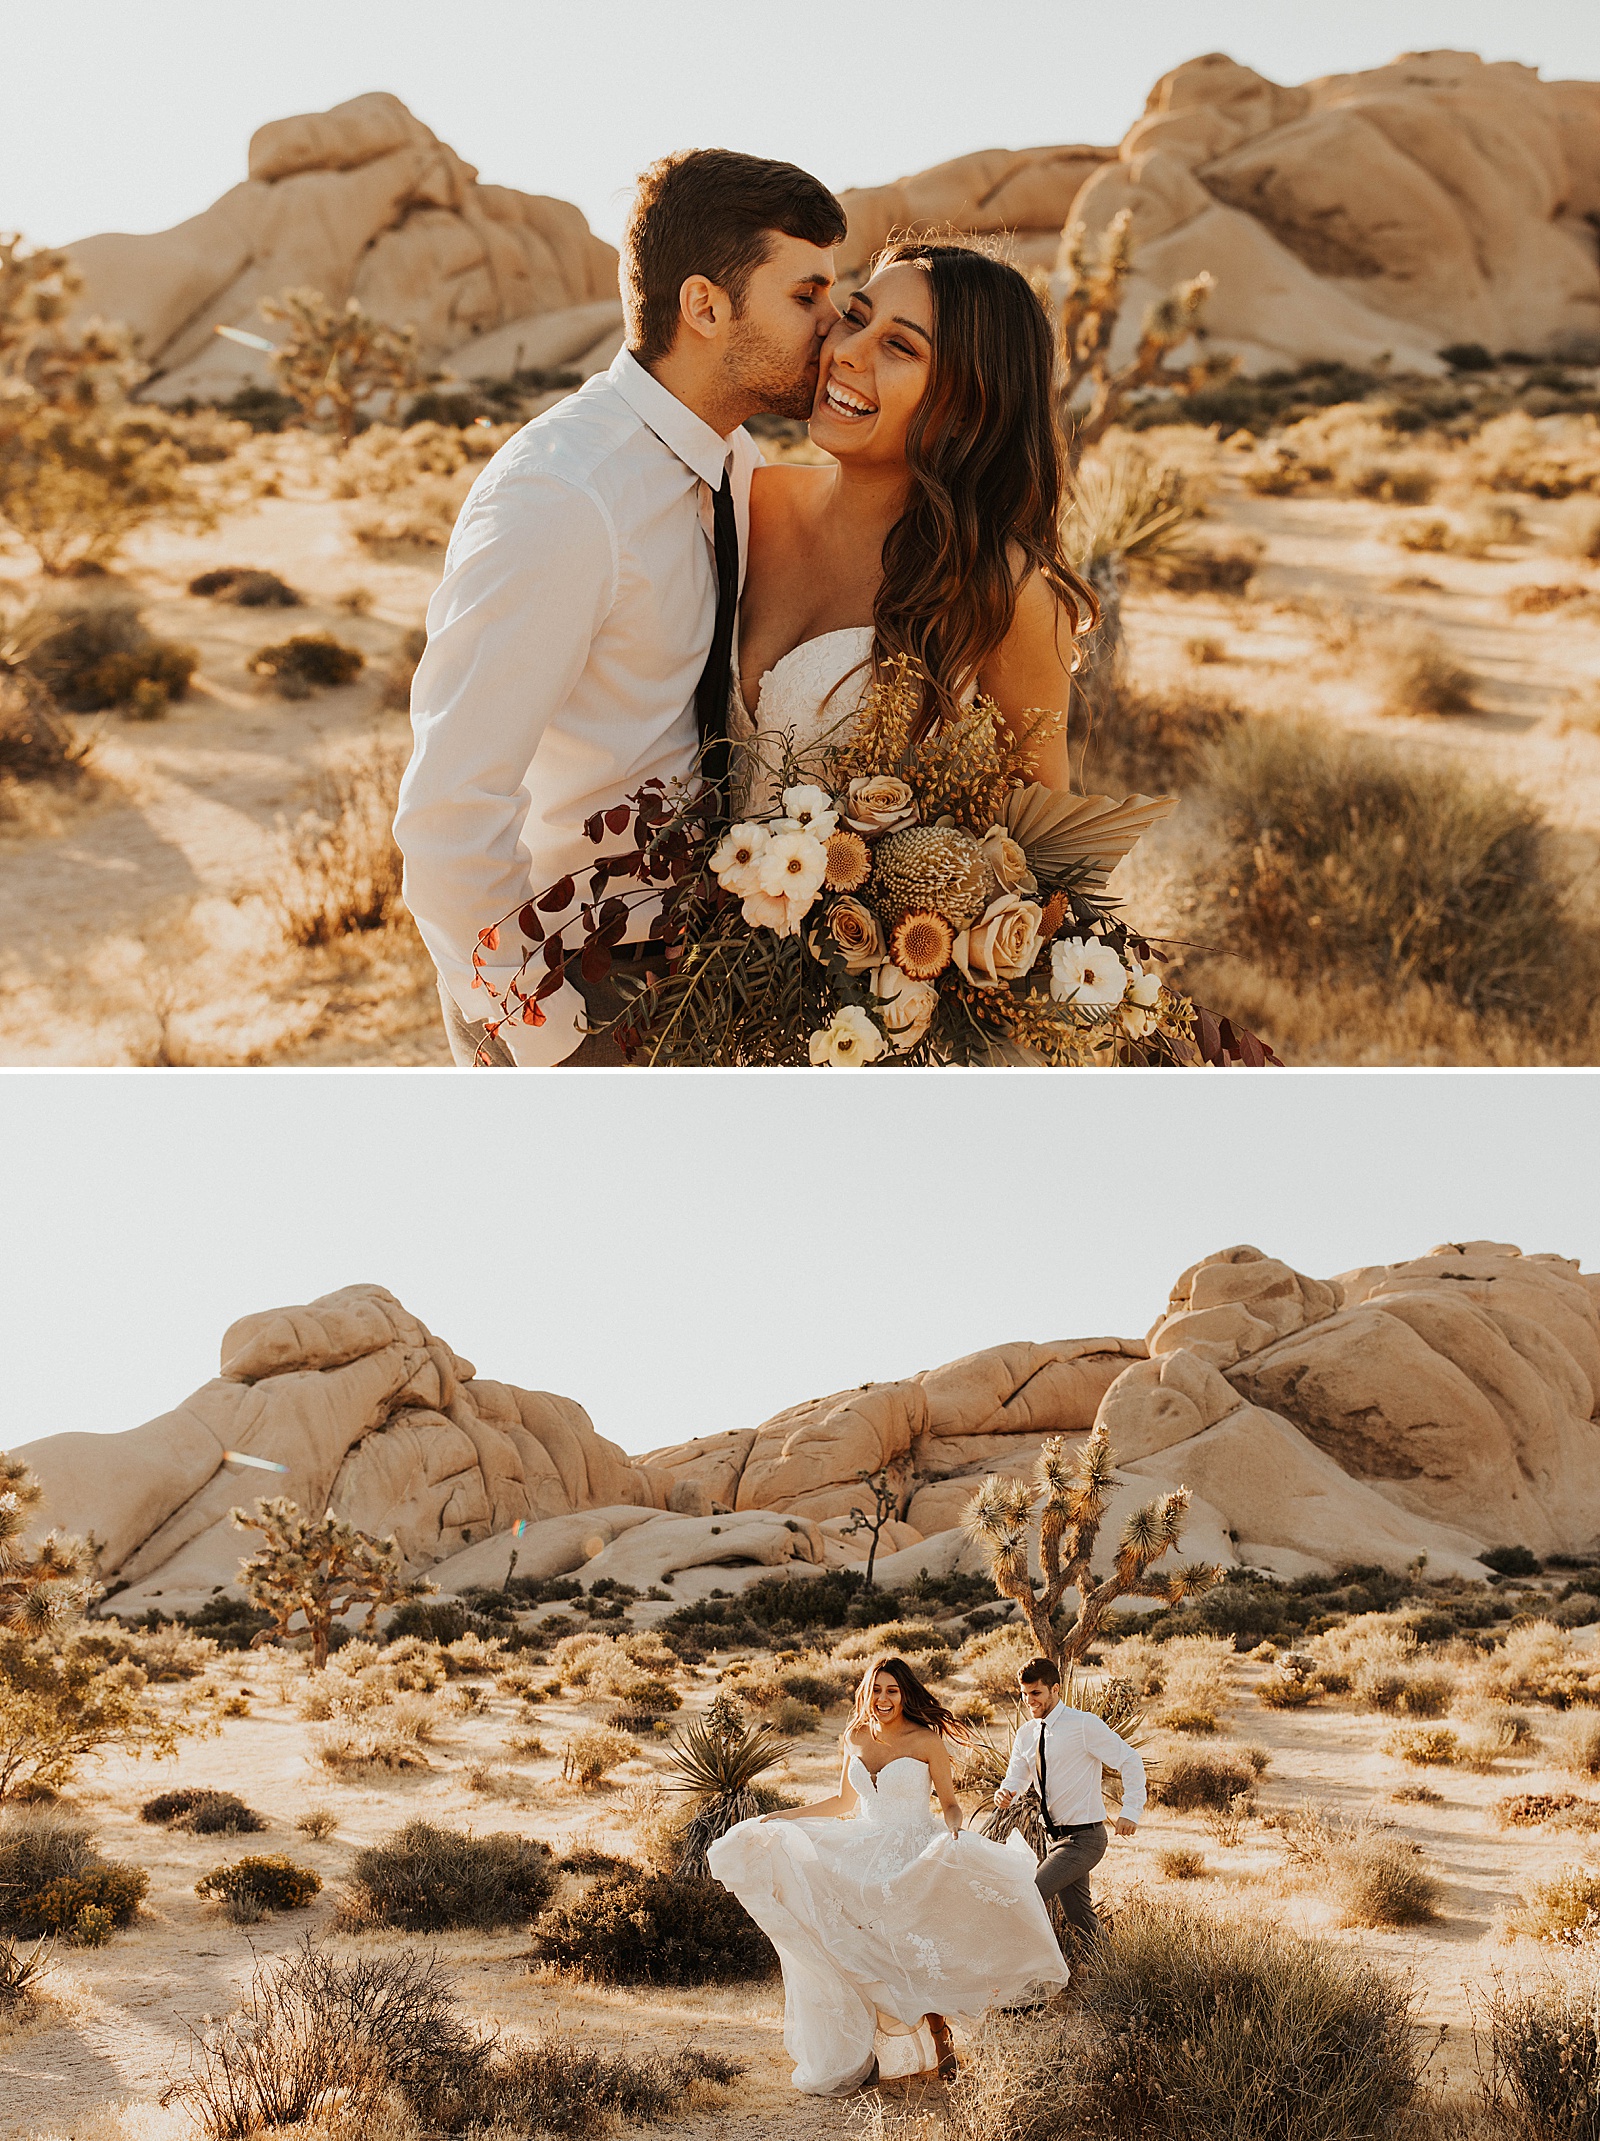 A bride and groom photo at their elopement in Joshua Tree National Park.